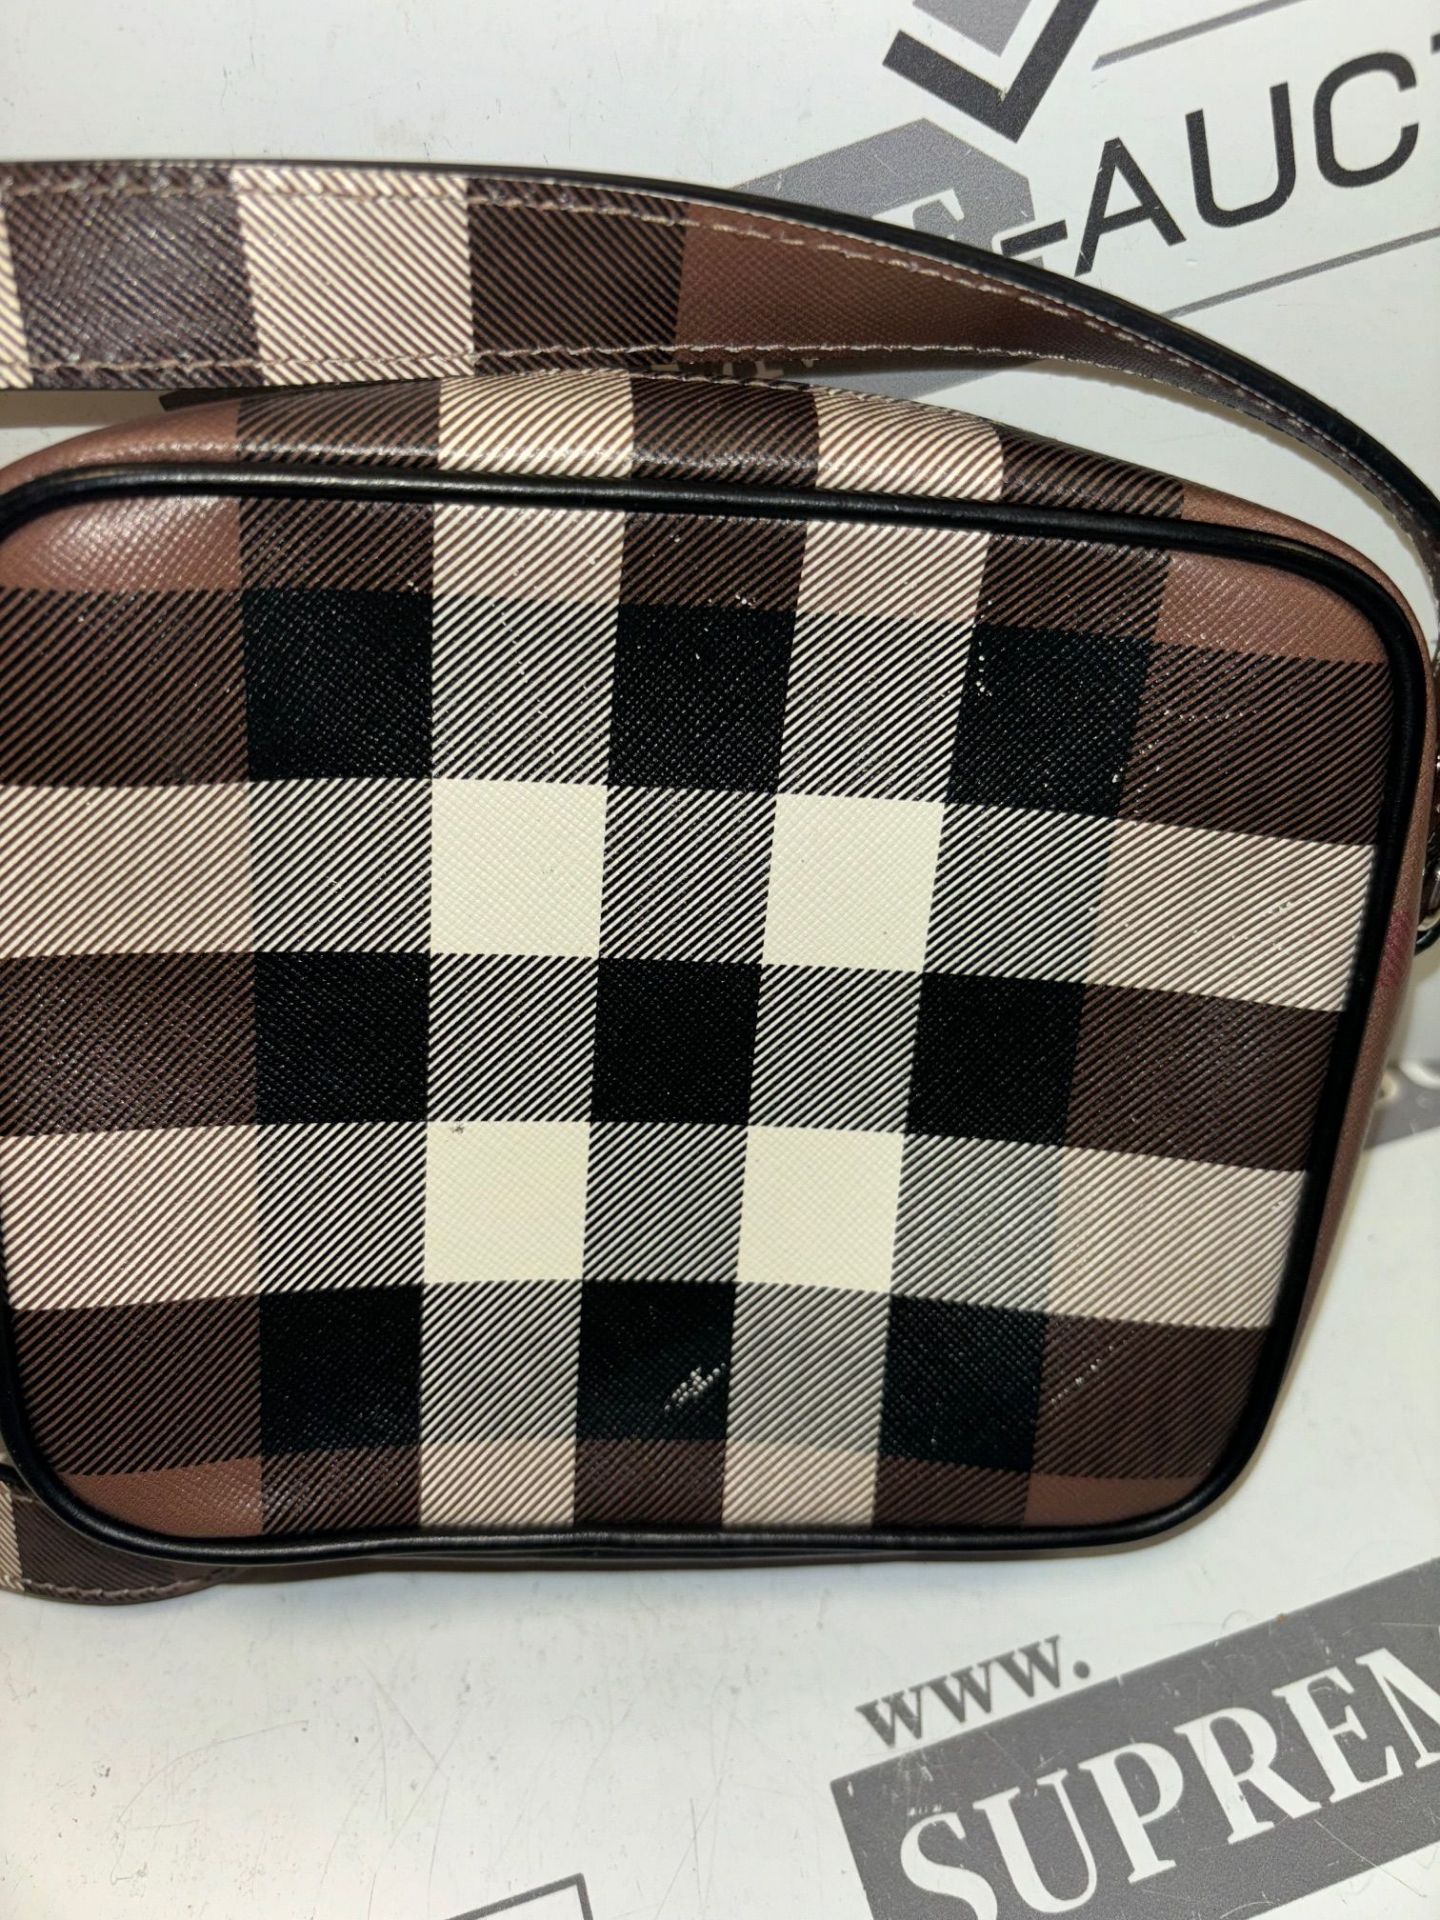 Burberry Shoulder Bag Check Coated Canvas Brown. 16x13cm. - Image 7 of 9